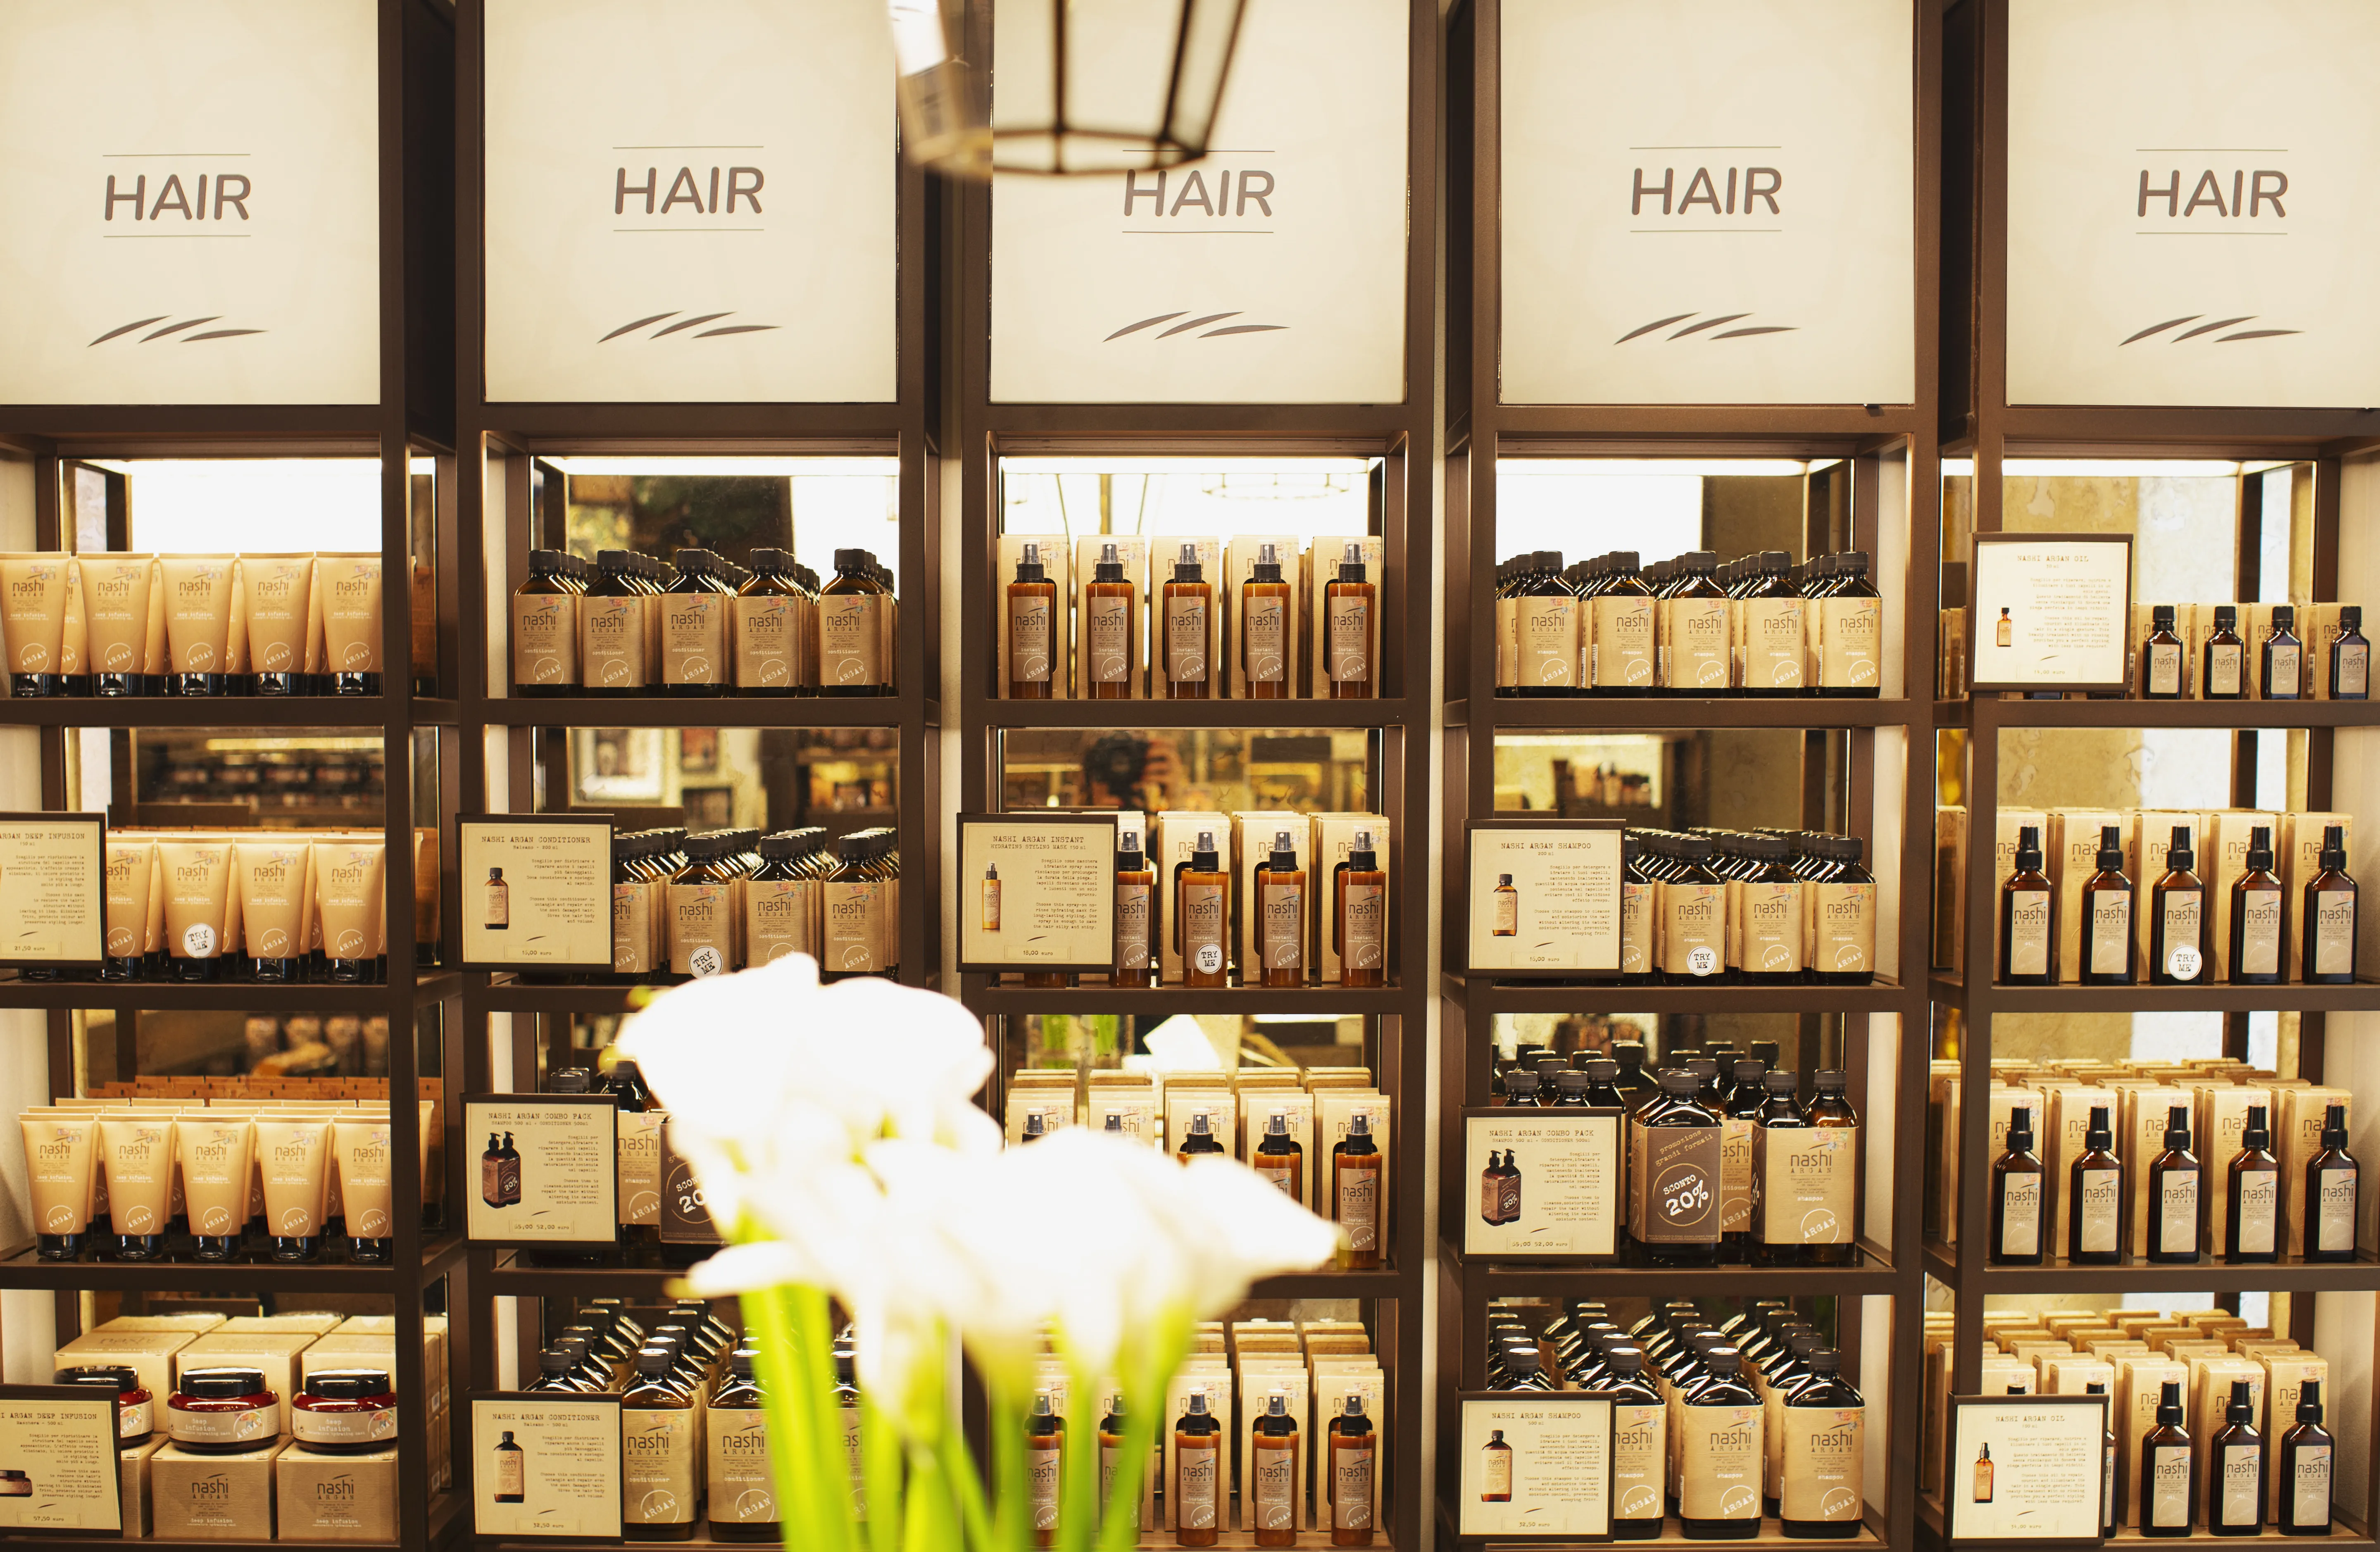 Nashi Argan Store Firenze in Italy, europe | Fragrance,Cosmetics - Country Helper